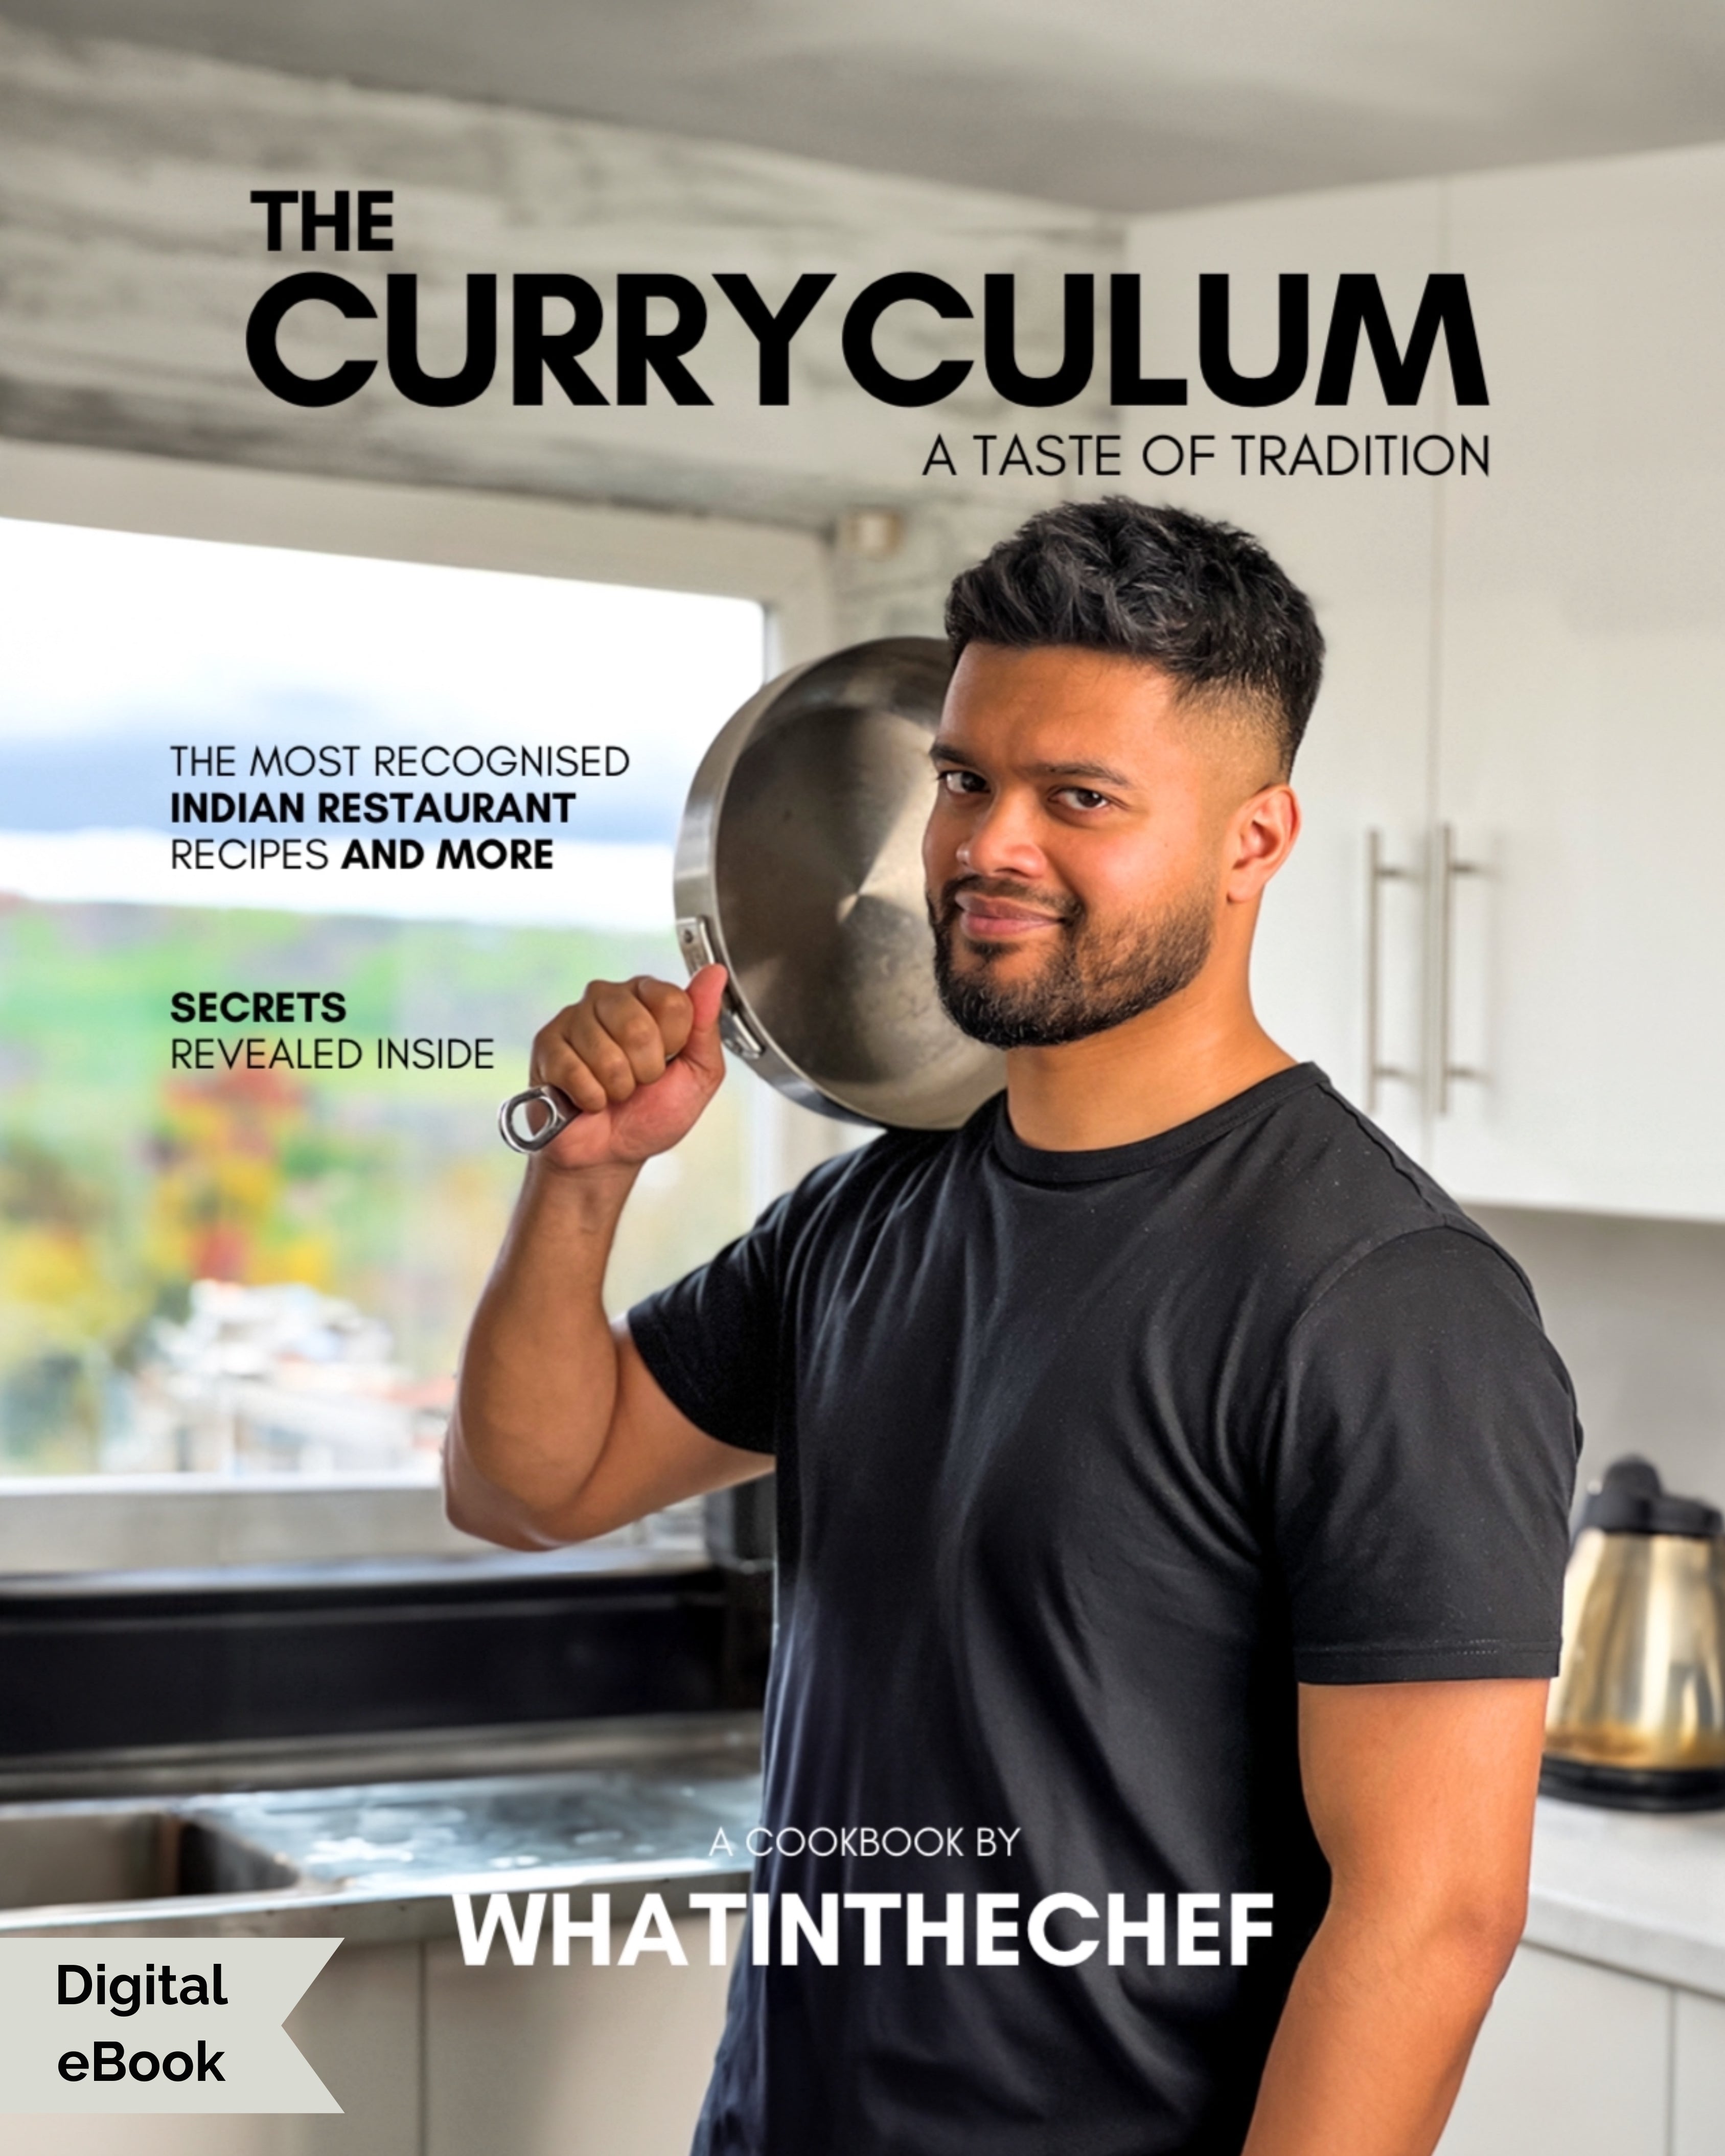 THE CURRYCULUM: A TASTE OF TRADITION